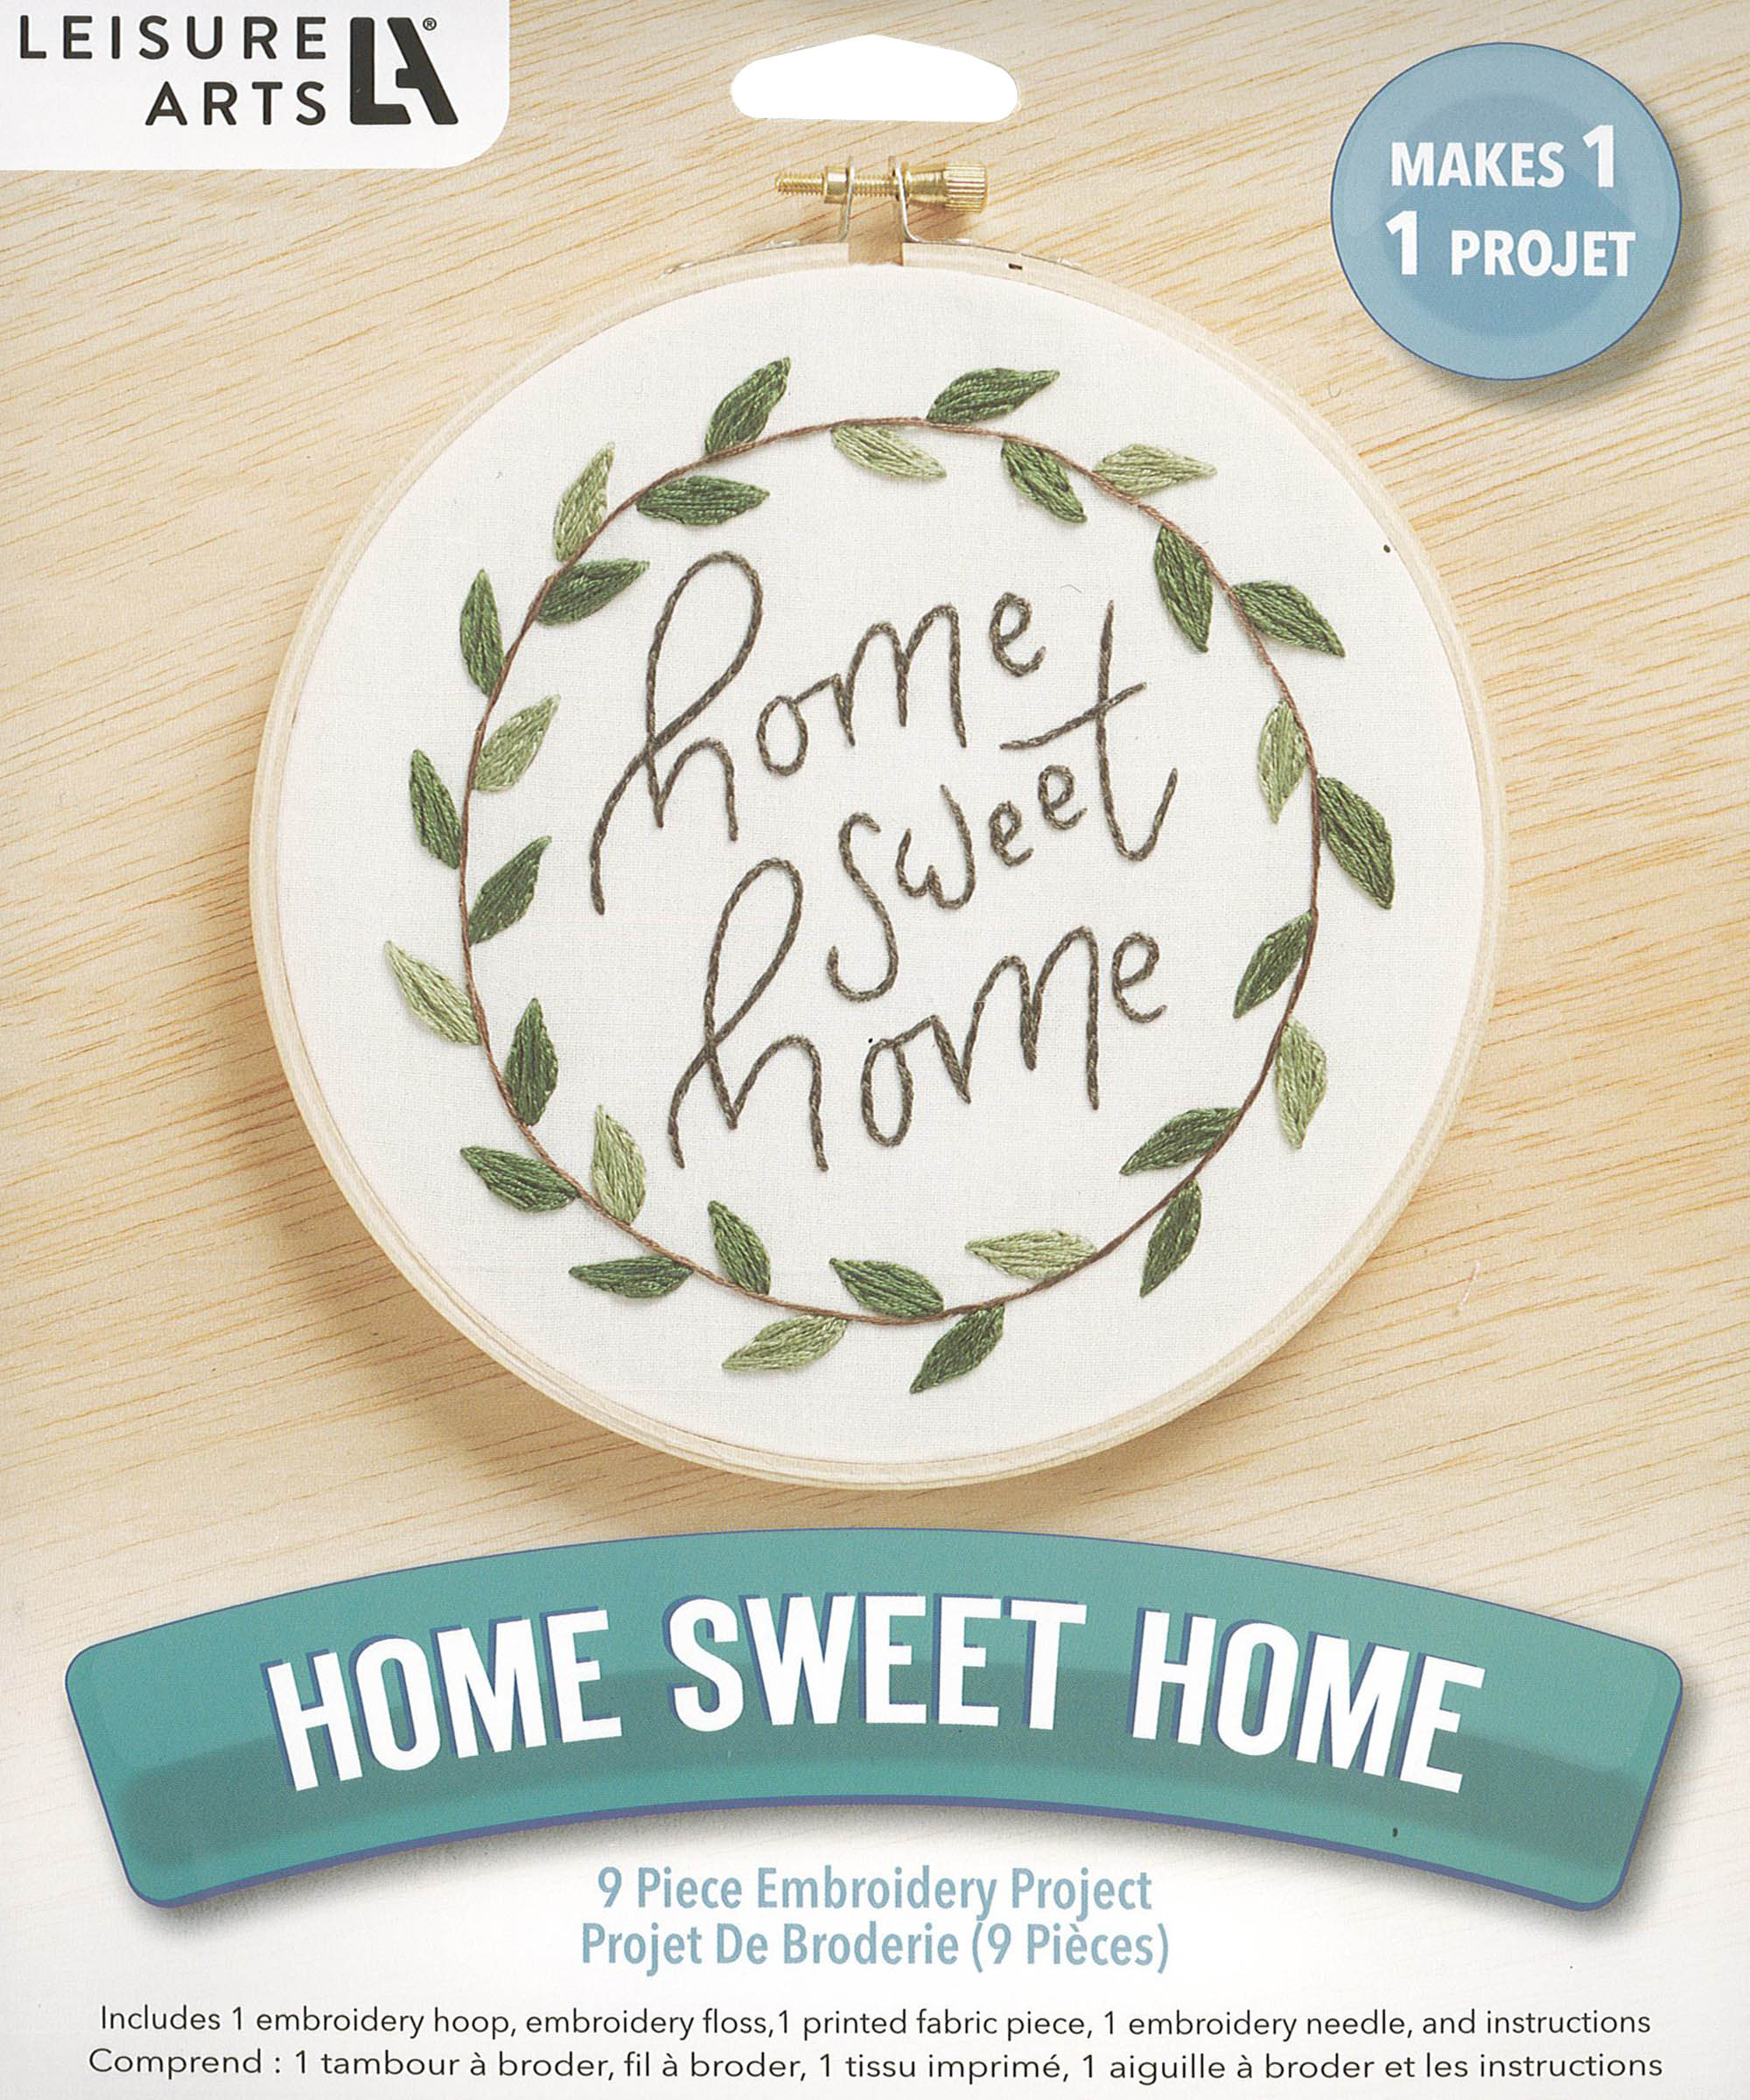 Embroidery Kit, Home Sweet Home, Beginner Embroidery Kit, Hand